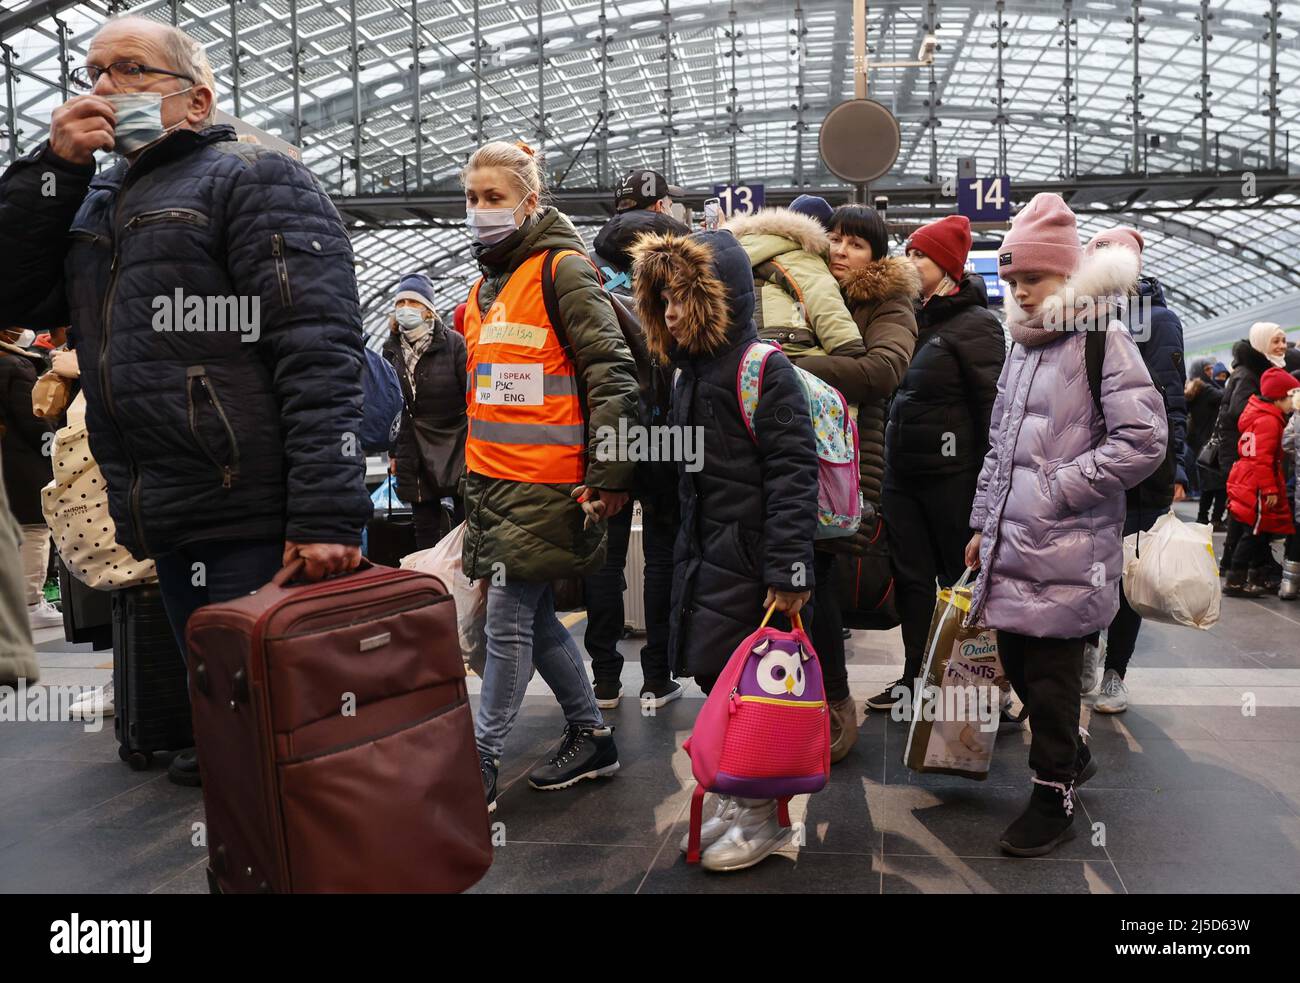 Berlin, 03.03.2022 - Refugees from Ukraine arrive with their children at Berlin Central Station. Volunteers help the refugees. Thousands of refugees from Ukraine have already arrived in Germany. [automated translation] Stock Photo